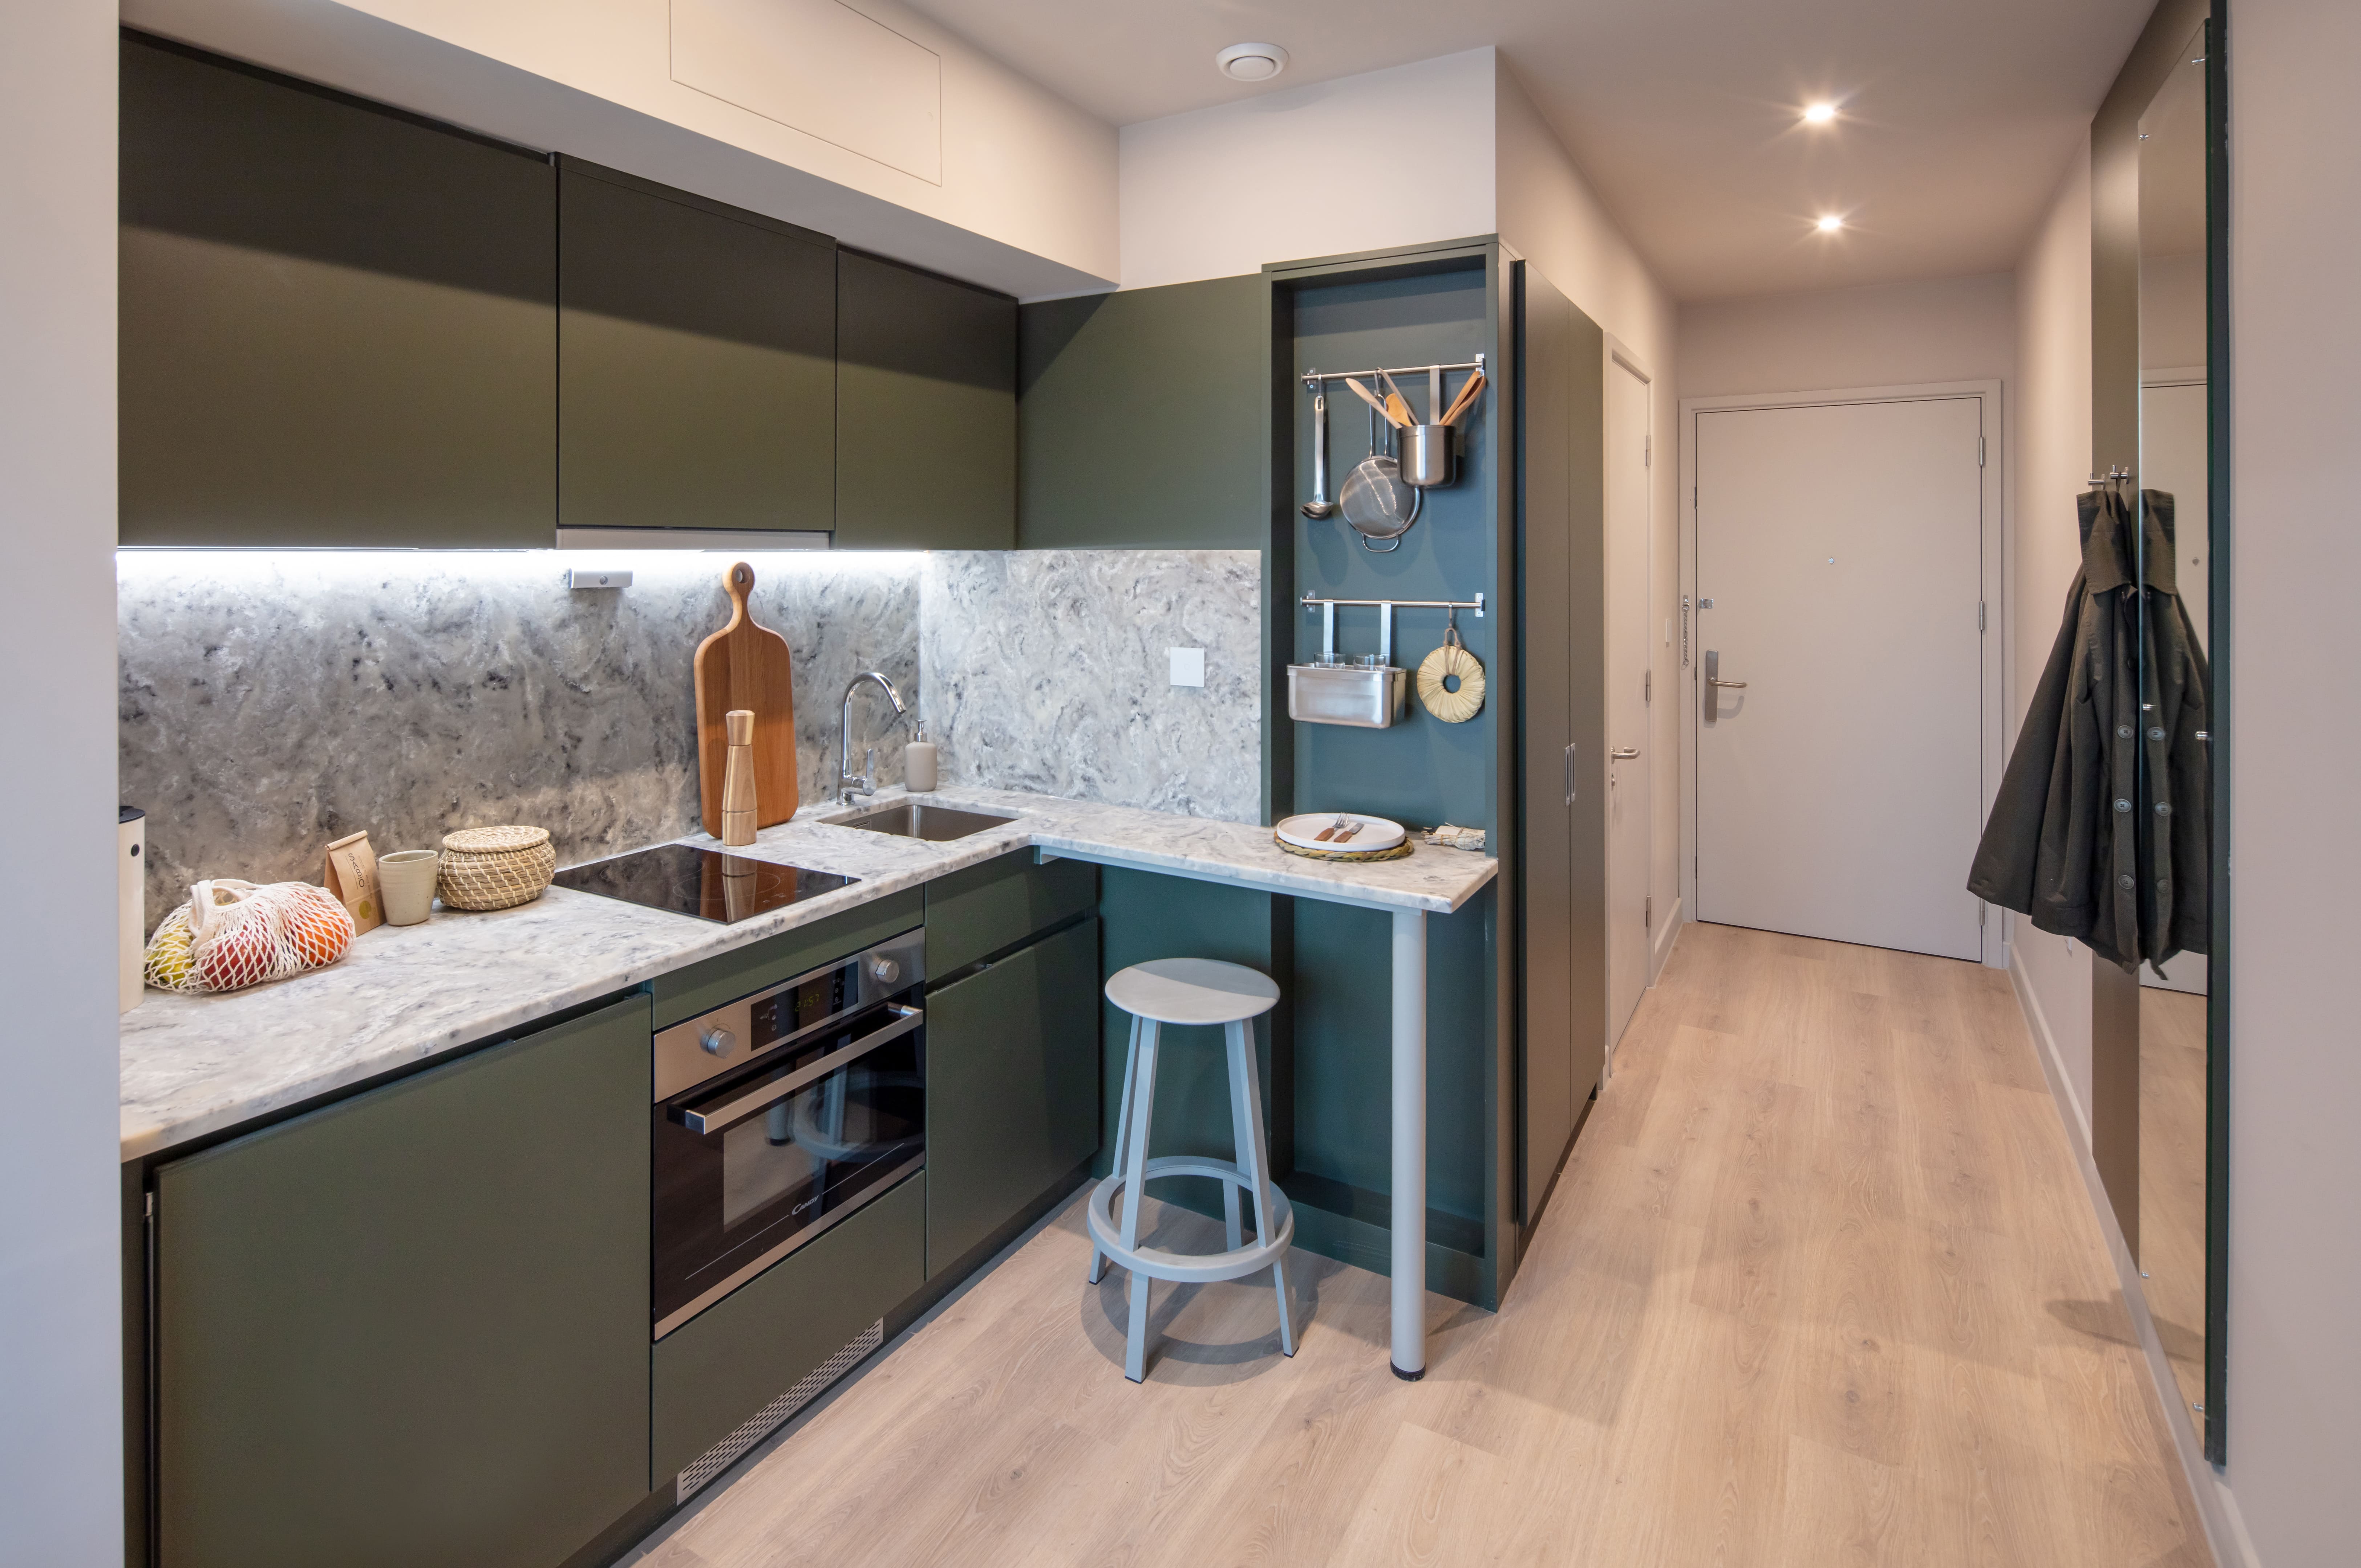 Make hearty home-cooked meals in your private kitchenette